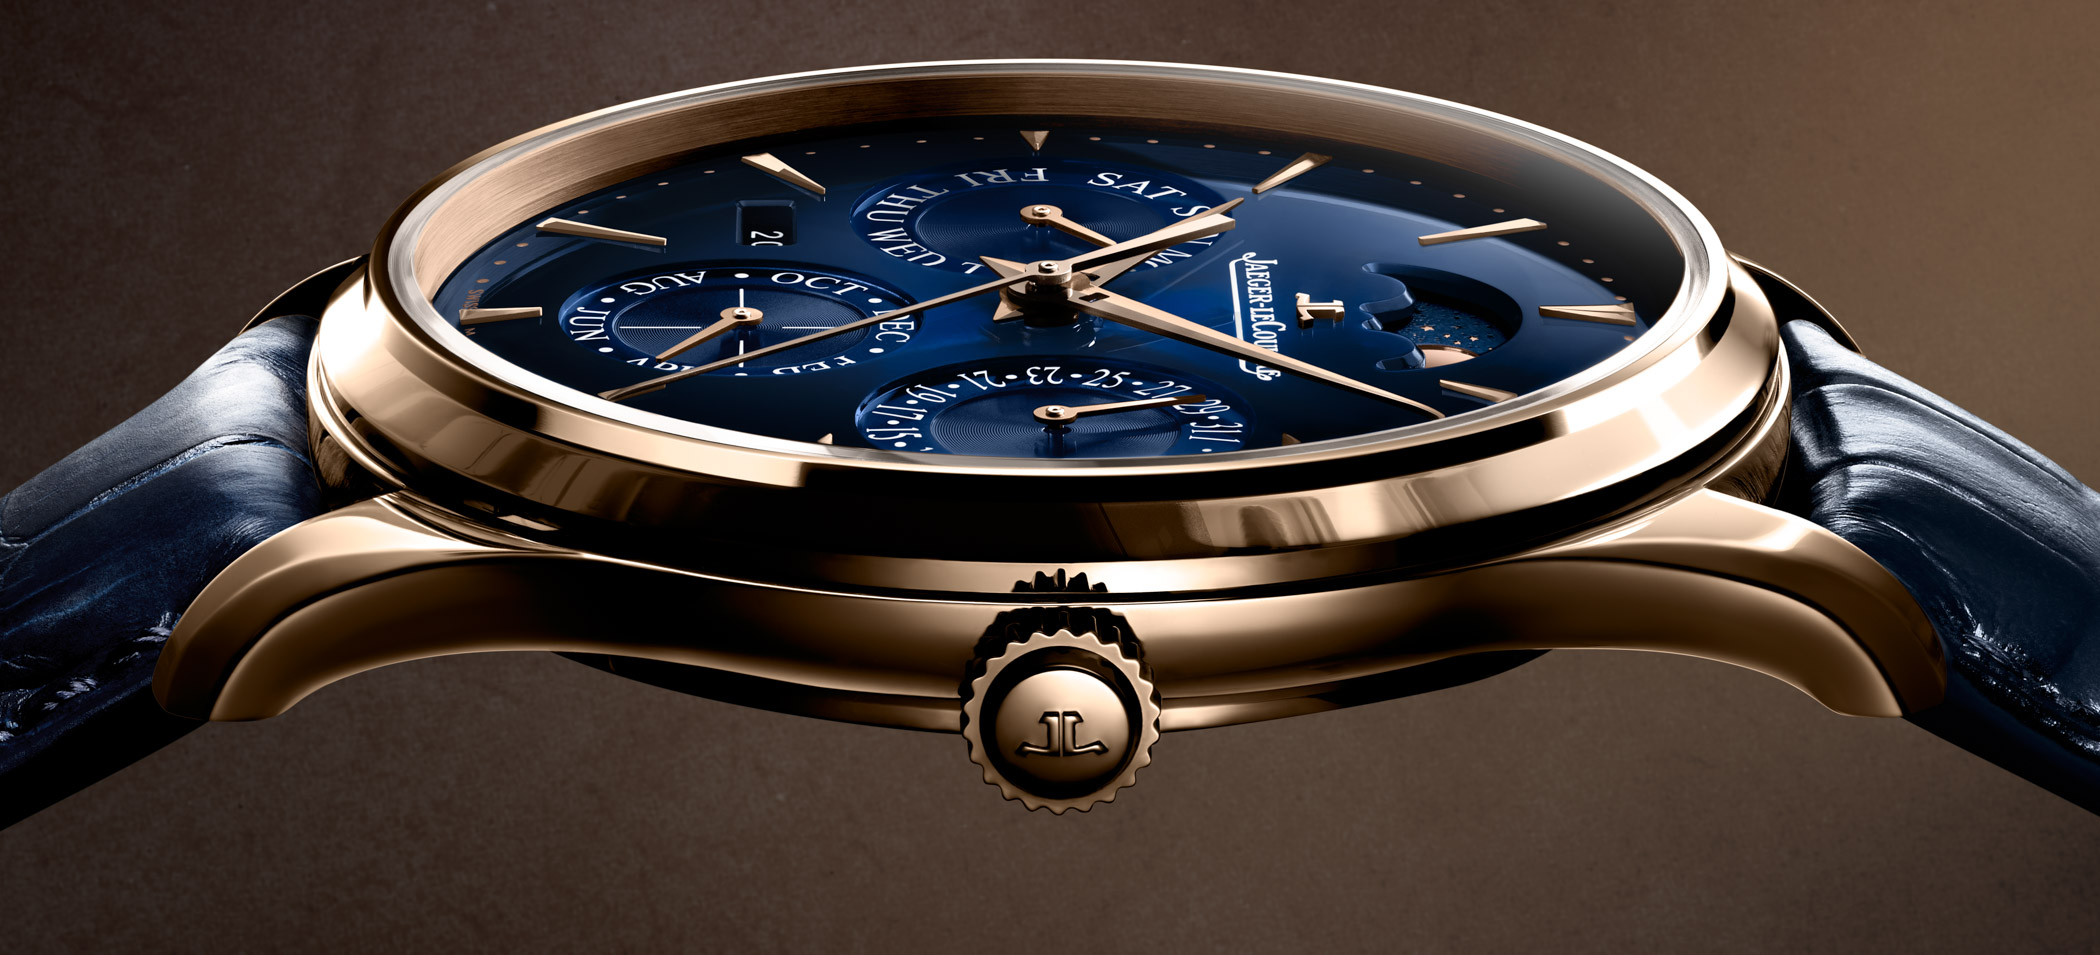 New Release: Jaeger-LeCoultre Master Ultra Thin Perpetual Calendar ...